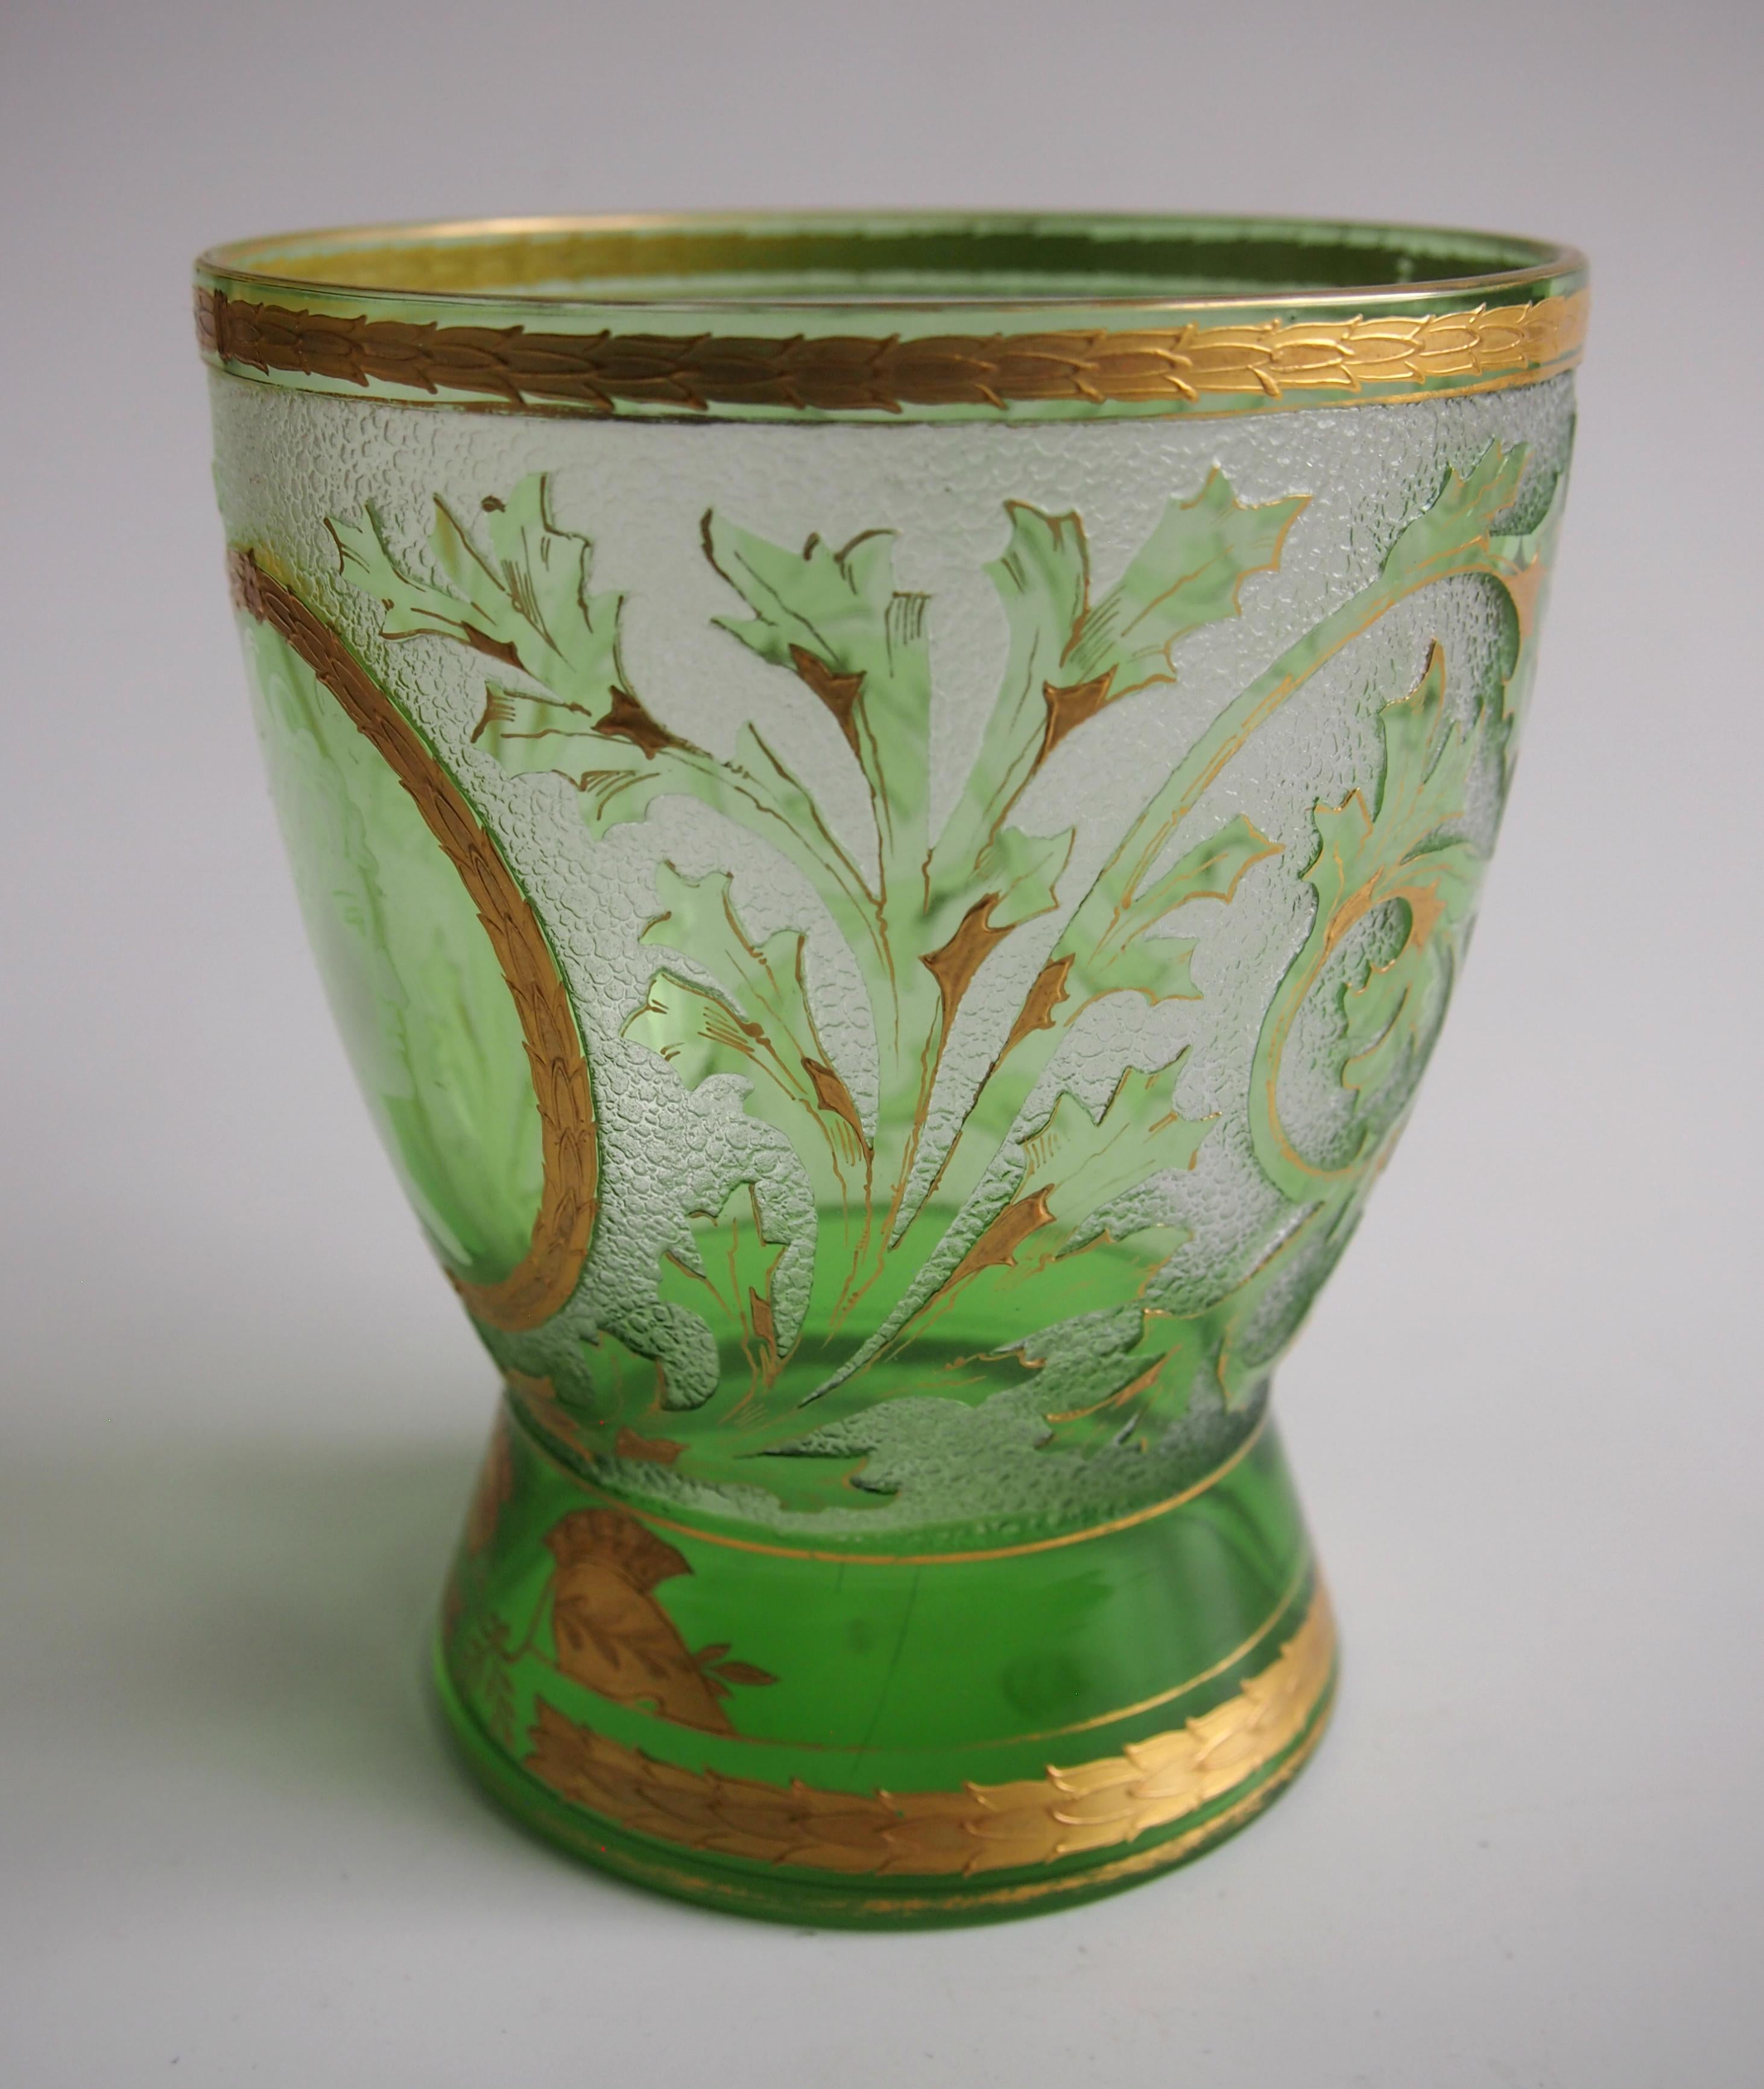 Stunning Riedel cameo and gilded, green on clear - 'Helmet' vase. The main body is decorated with green leaves and branches highlighted by gilding. It has a very fine white profile face of a lady in a gold cartouche. It's in the Riedel book and